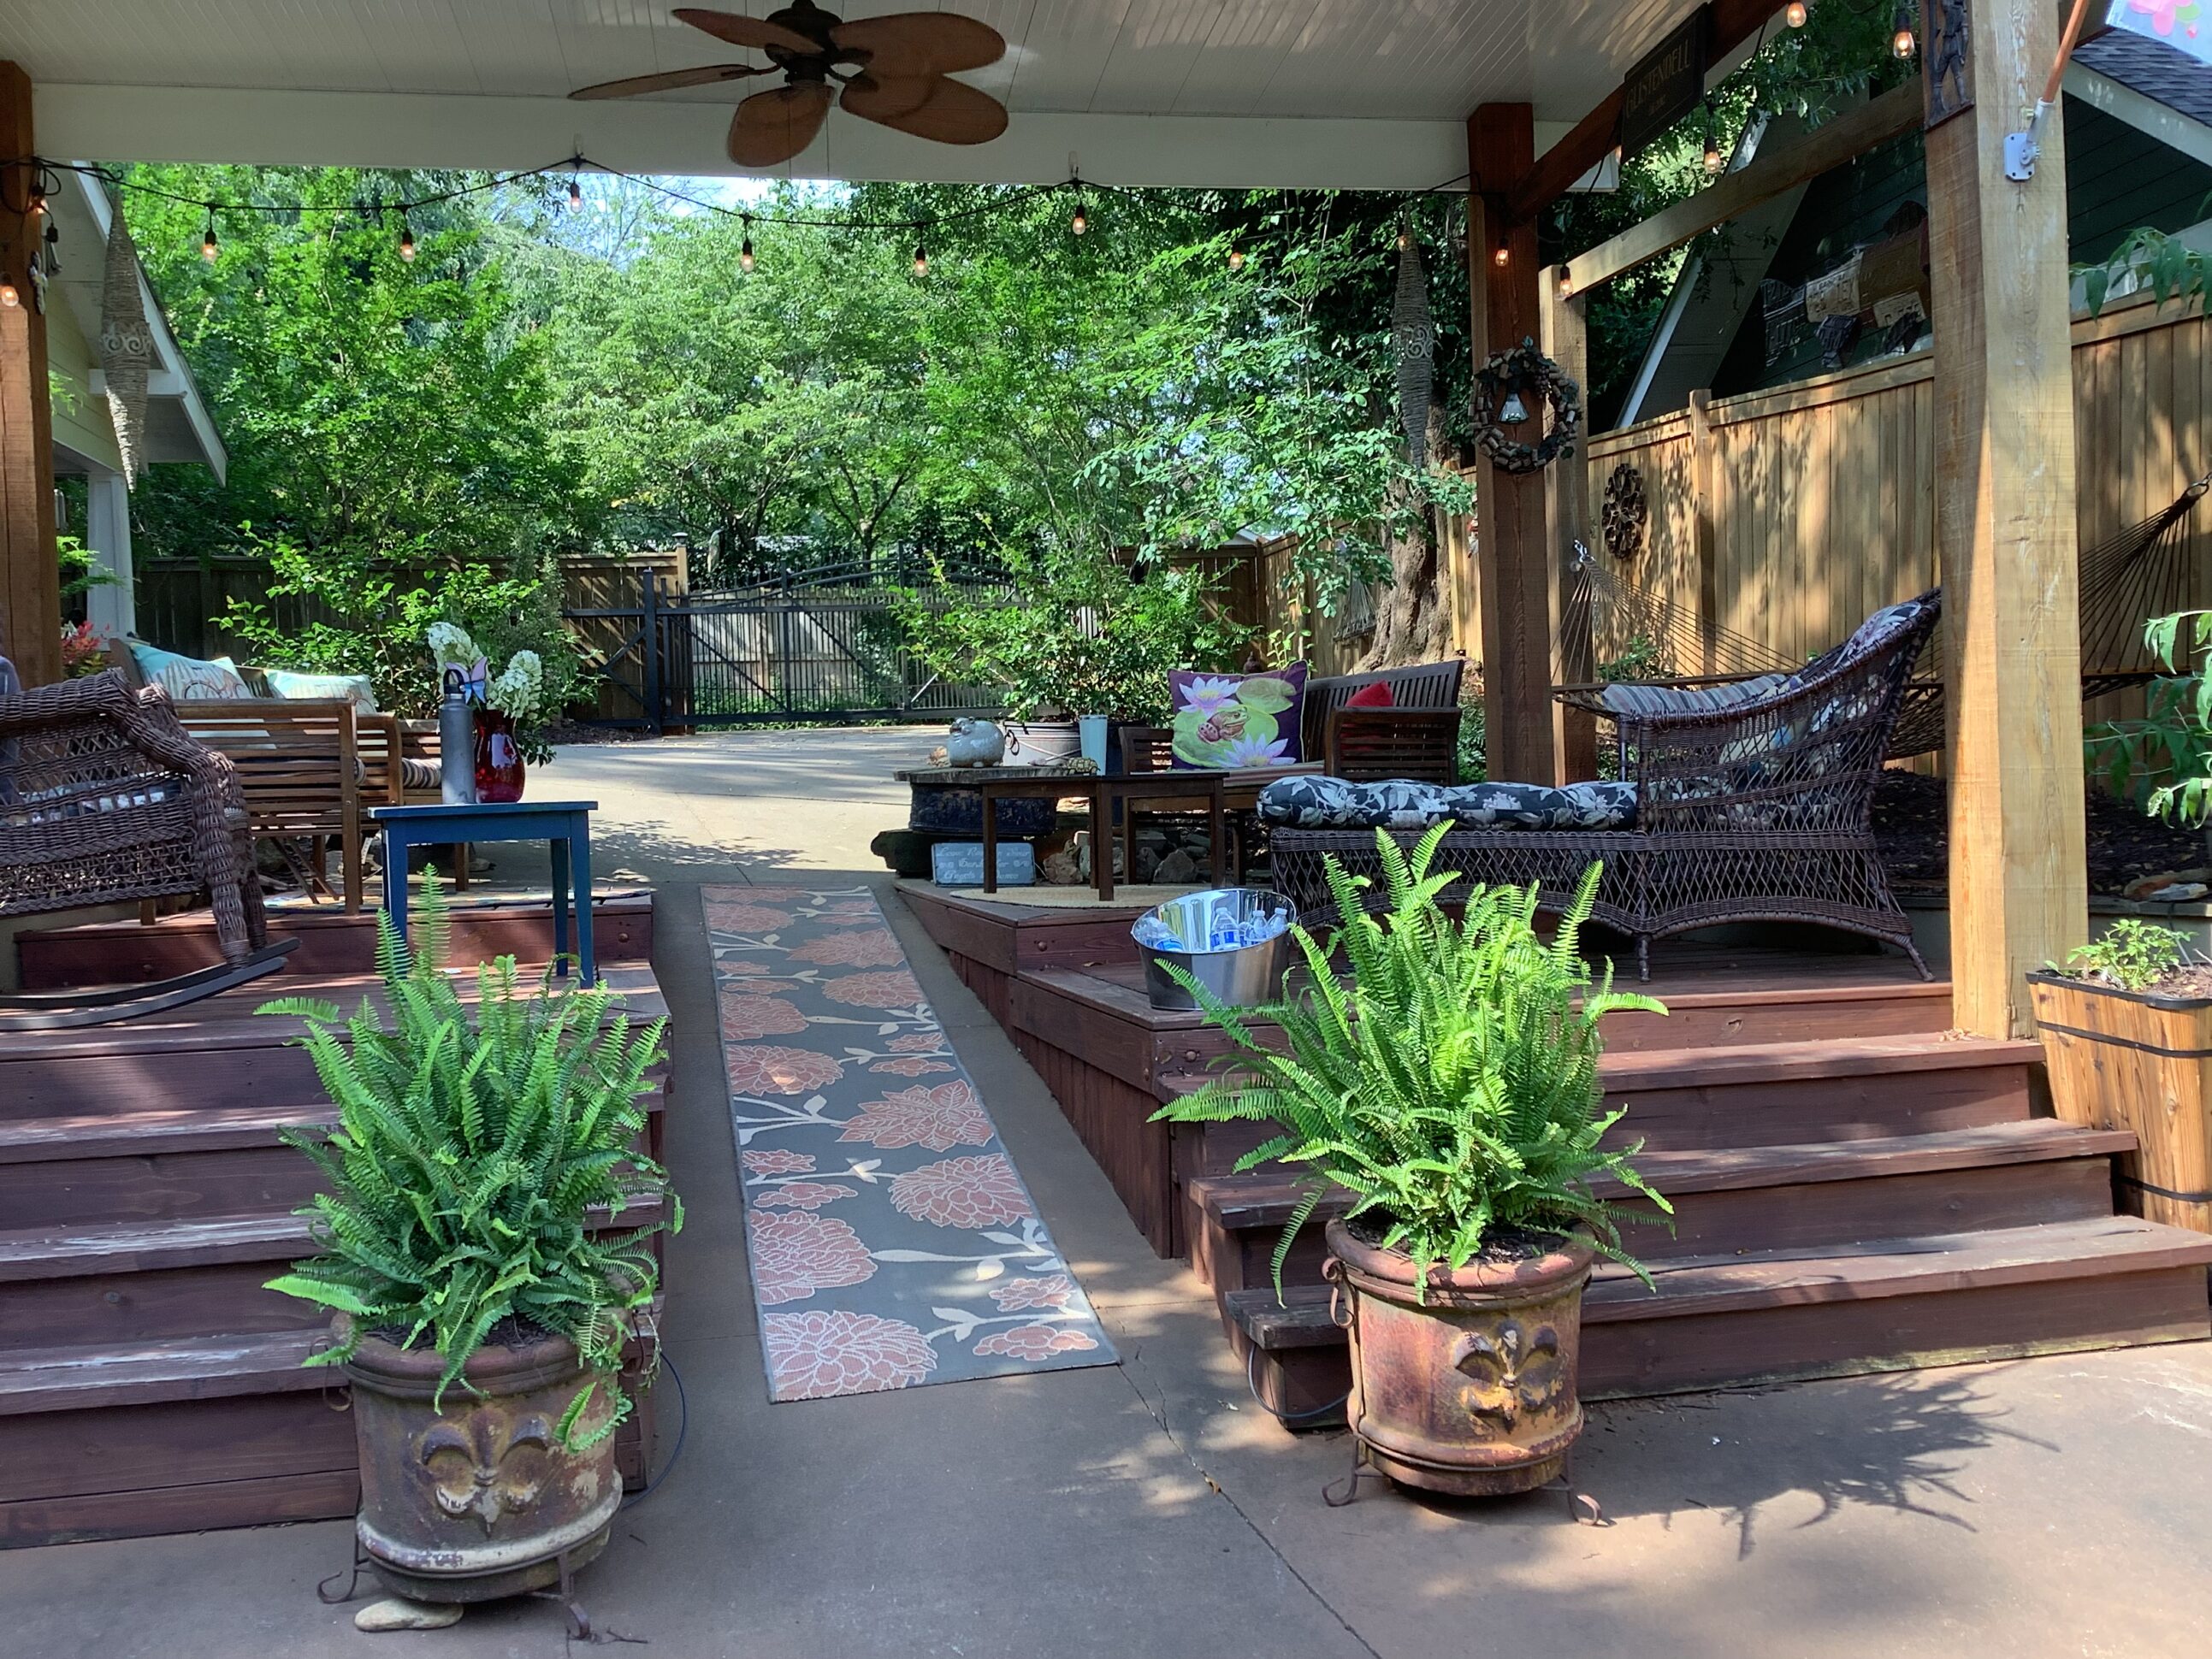 A patio with several potted plants and a gazebo.